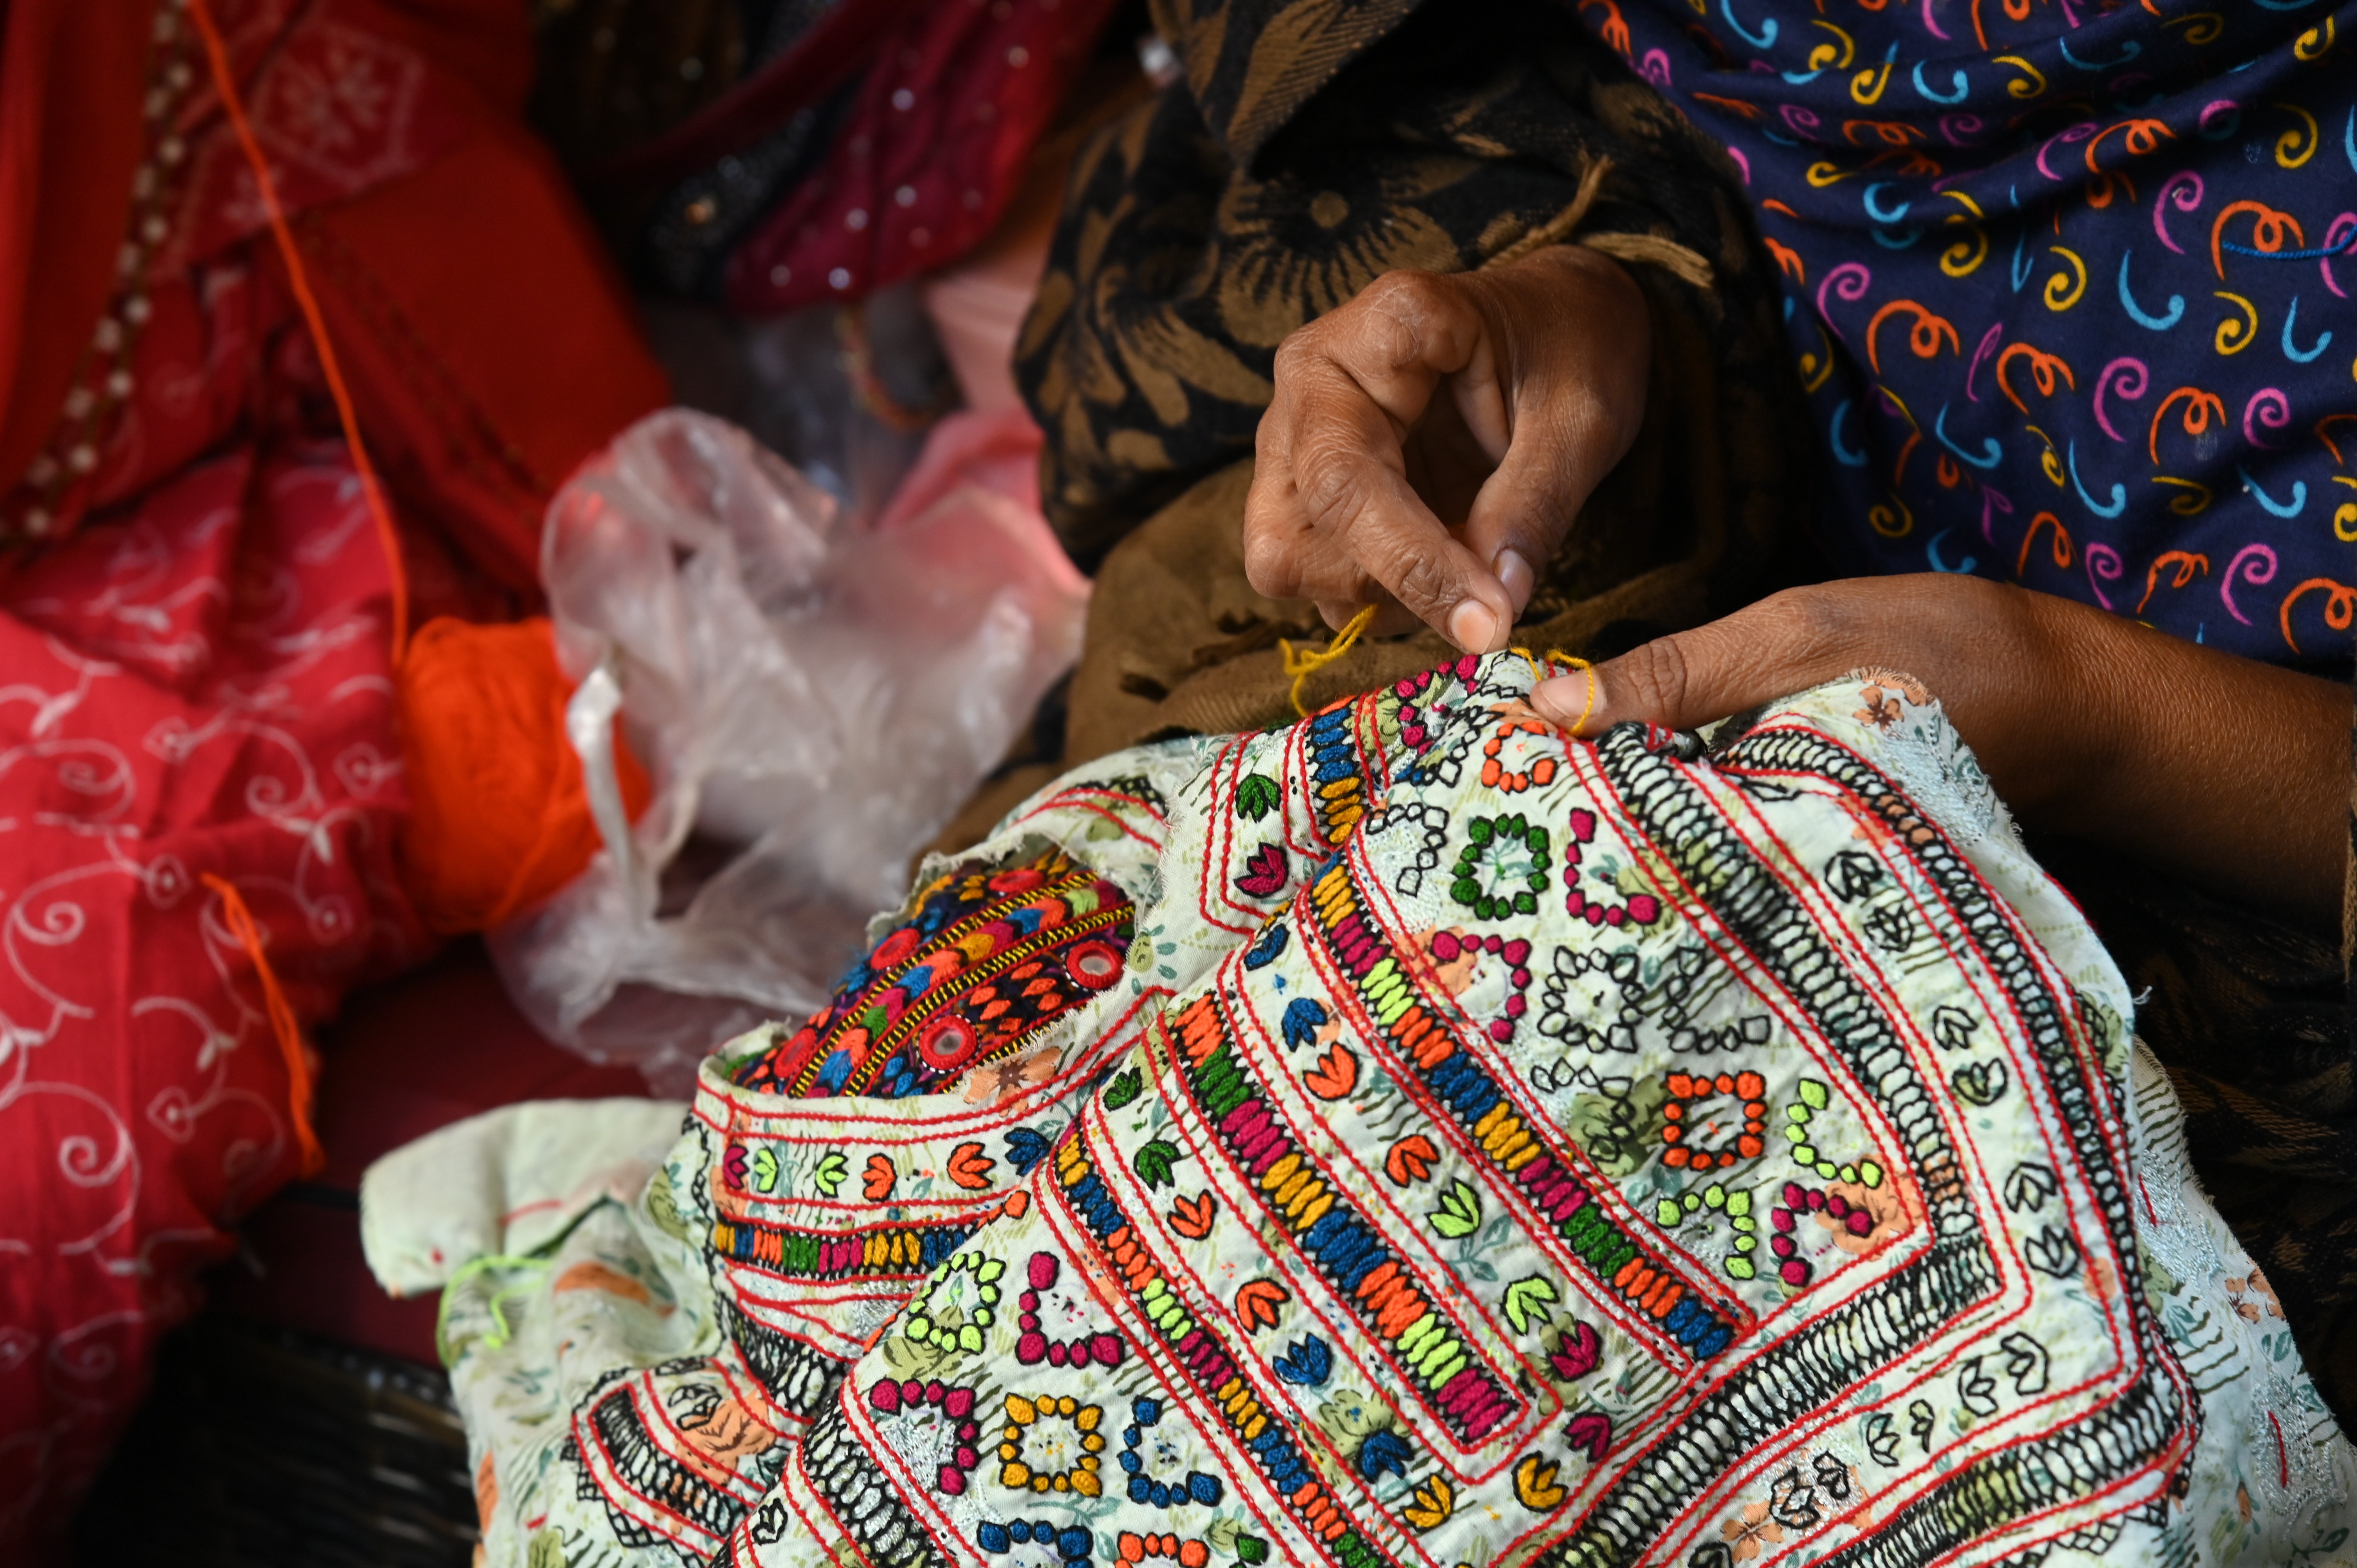 Women busy with embroidery work